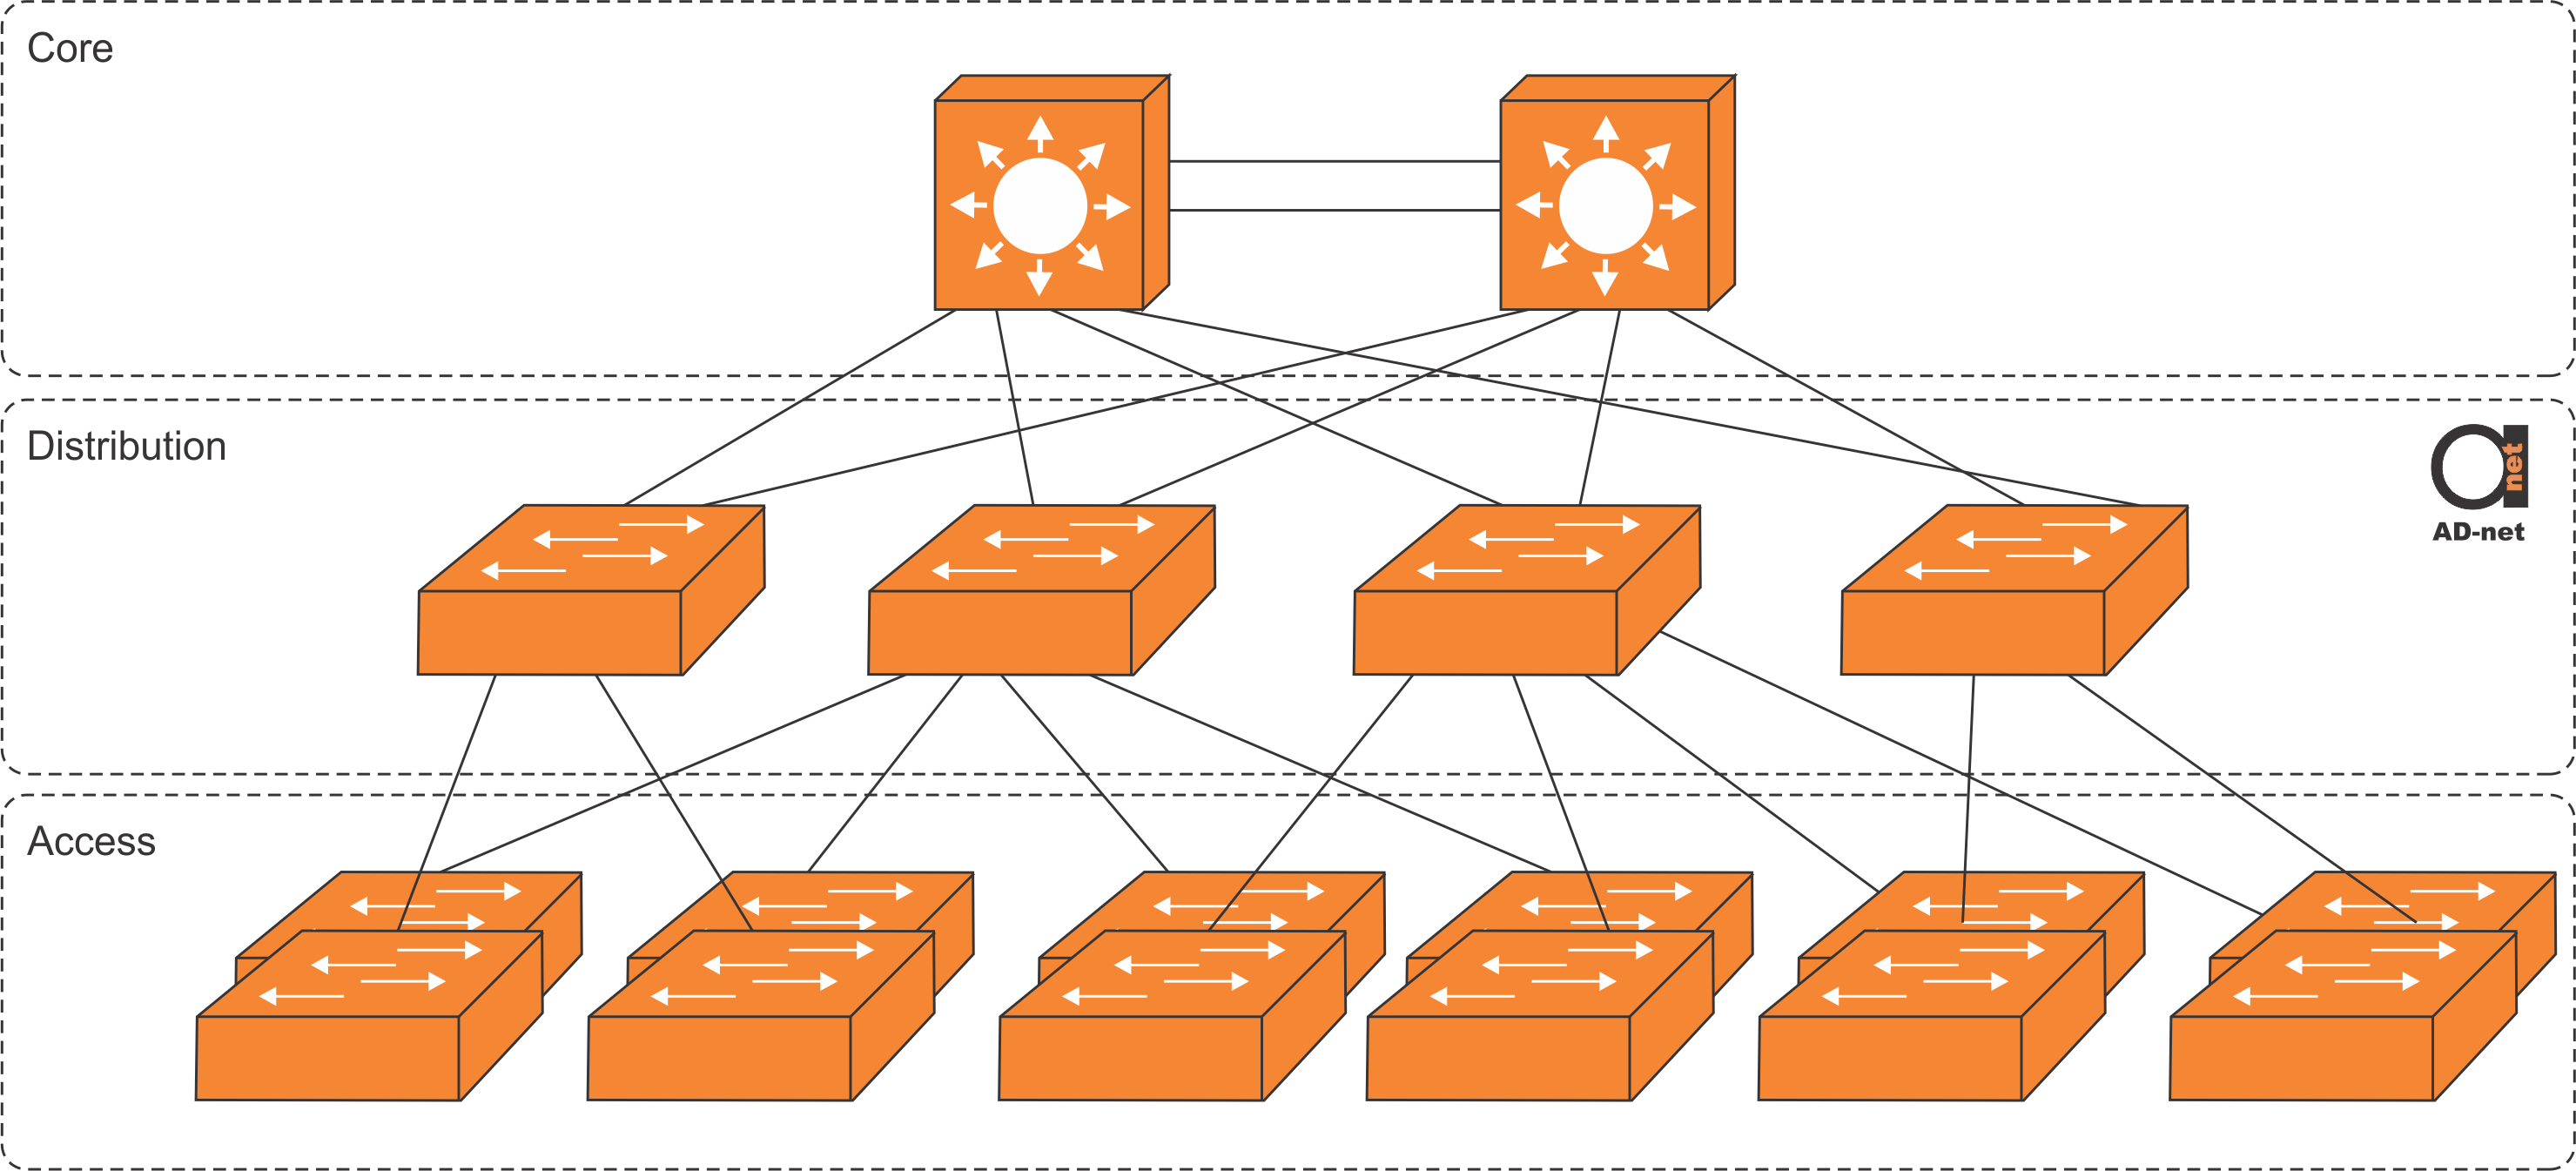 Three-Tier Architecture with Core, Distribution and Access Layers